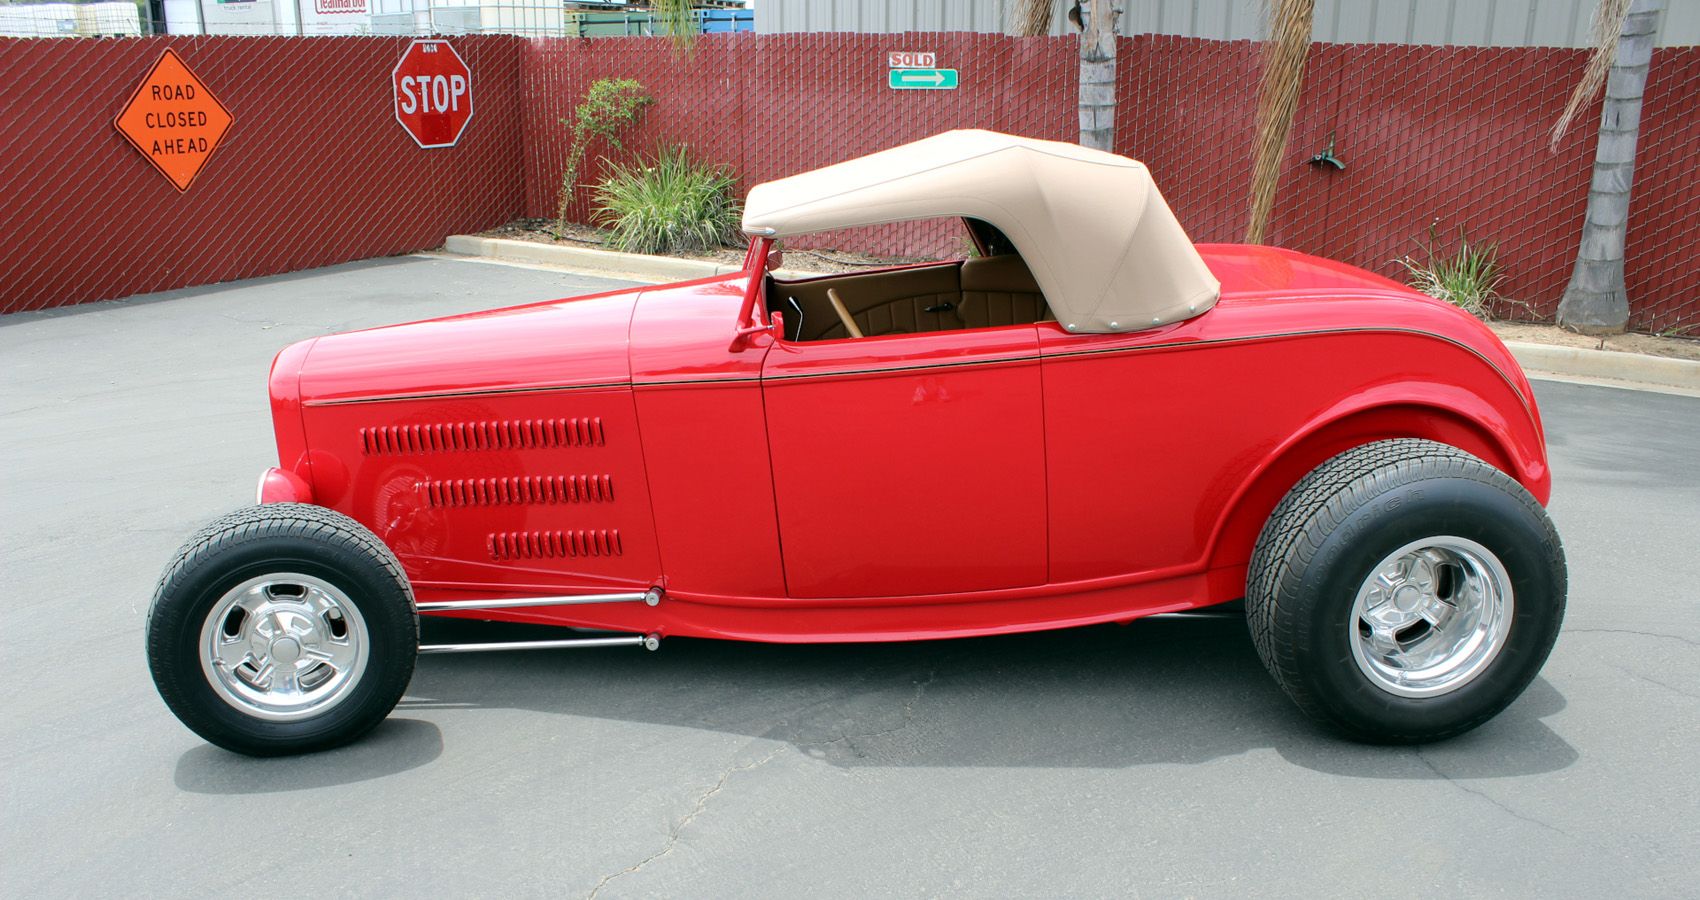 Last 1932 Ford "Deuce" Roadster By Richard "Magoo" Megugorac Is Up For Sale